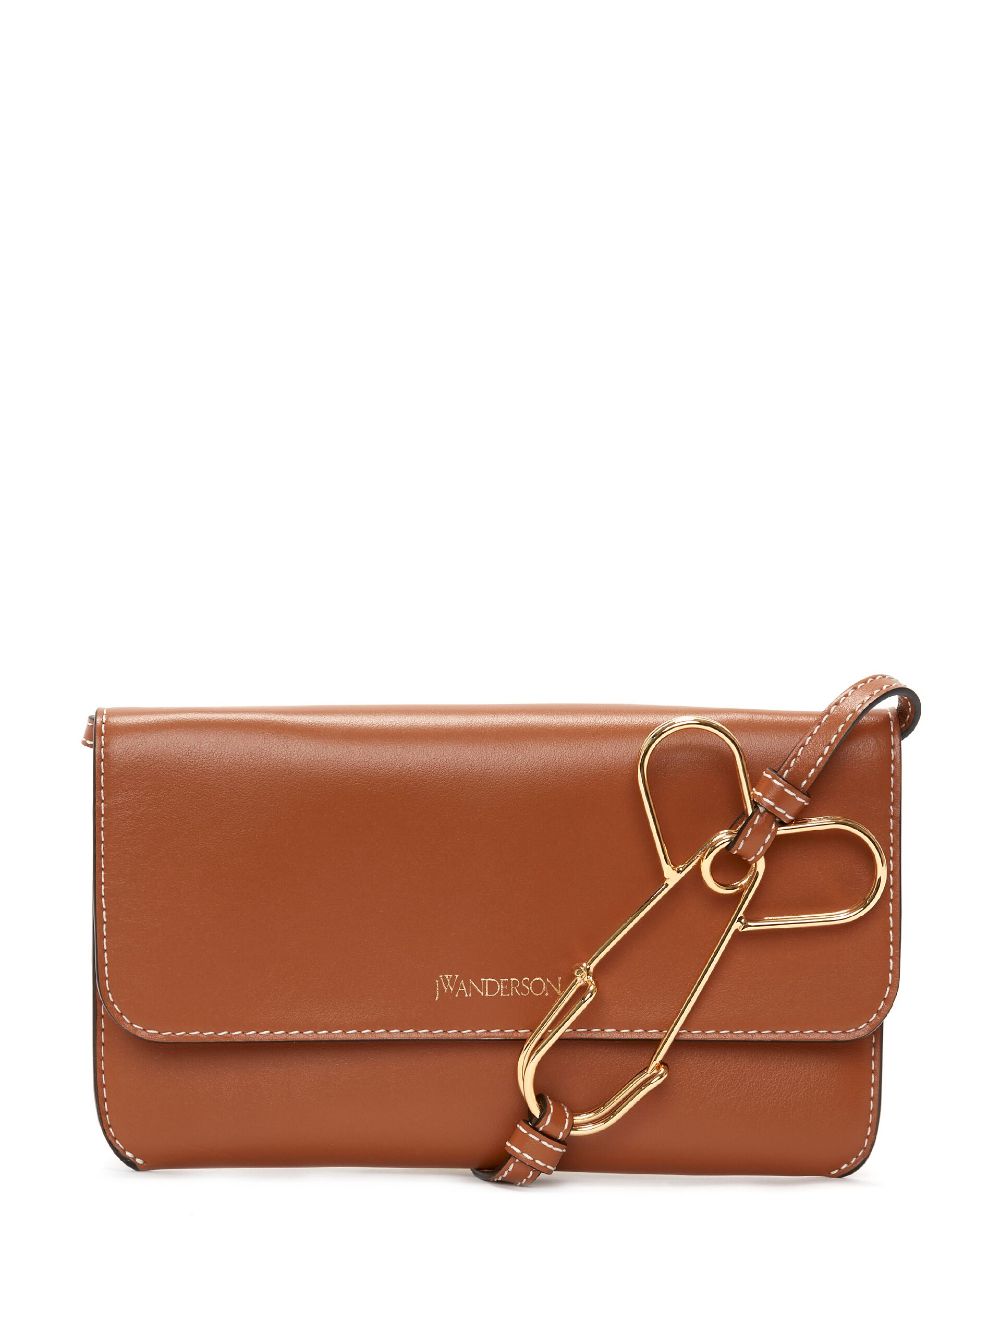 JW Anderson logo-print leather pouch bag - Brown